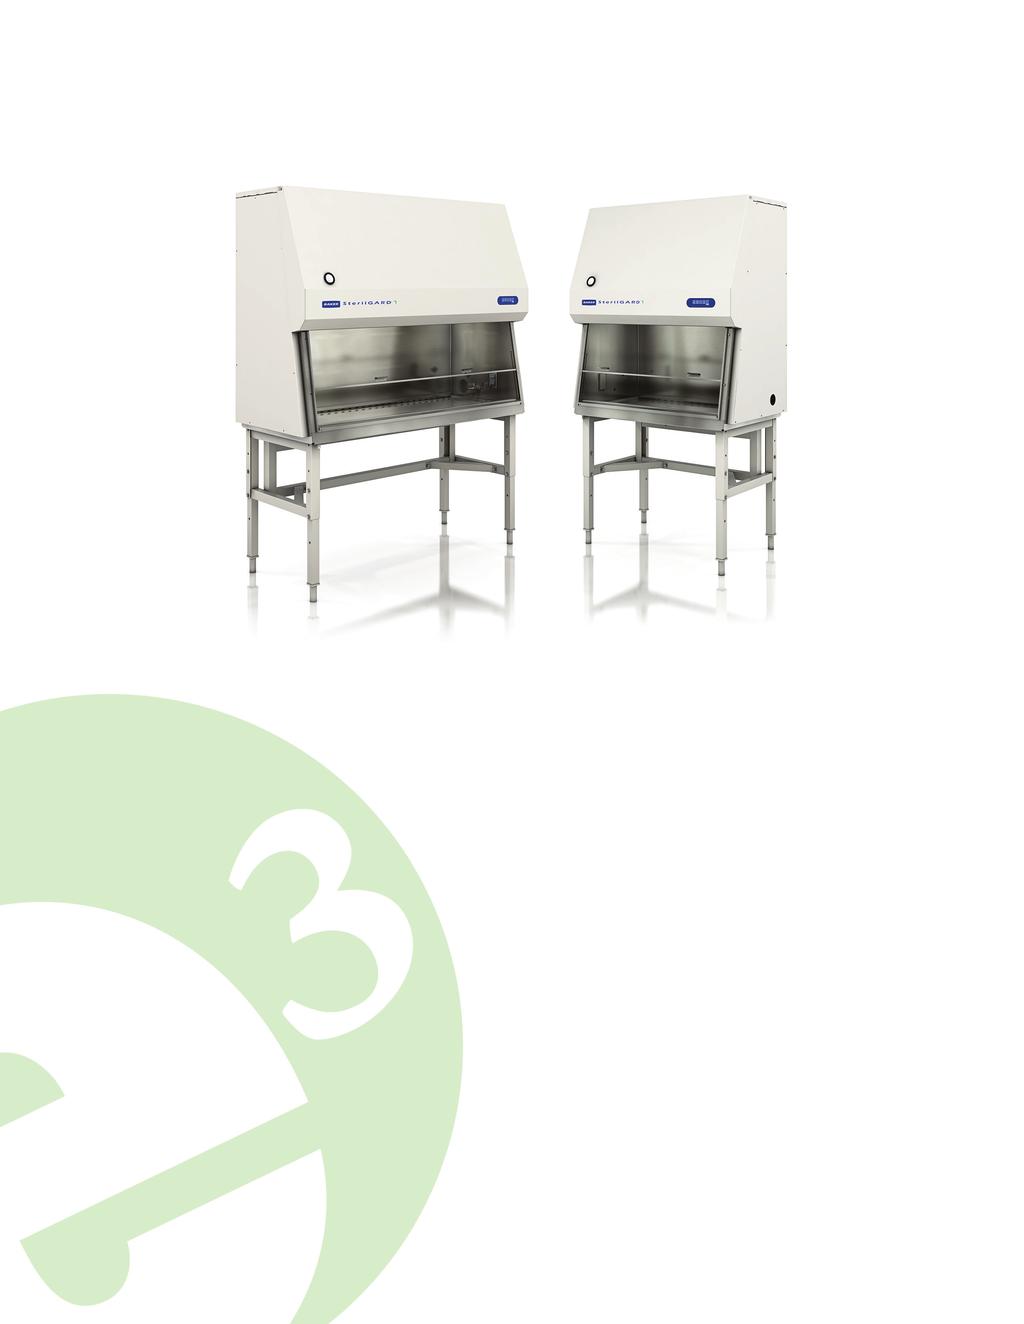 SterilGARD e3 Class II Type A2 Biological Safety Cabinets Energy-efficient and comfortable cabinets that help you make the world a better place.